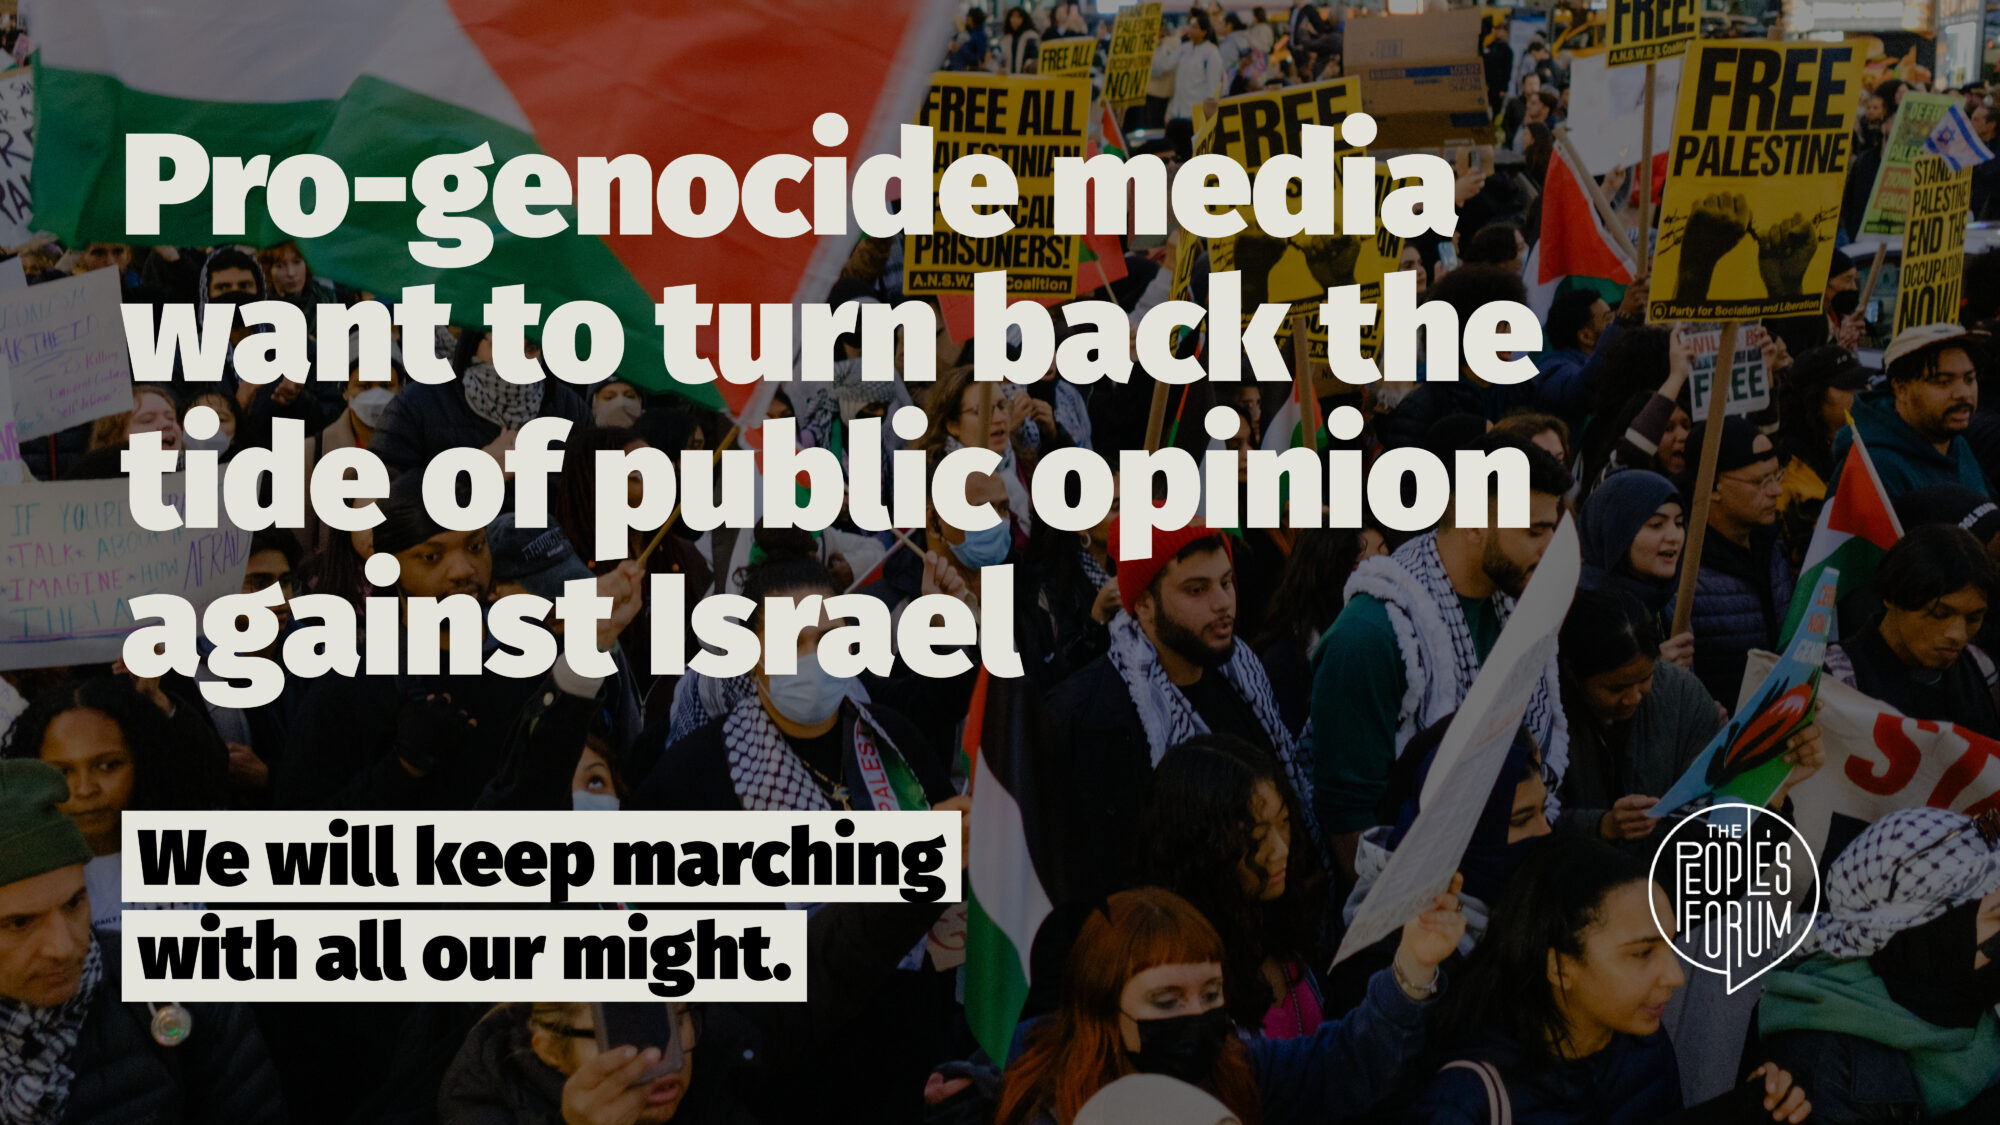 Text over a photo reads: Pro-genocide media want to turn back the tide of public opinion against Israel. We will keep marching with all our might.